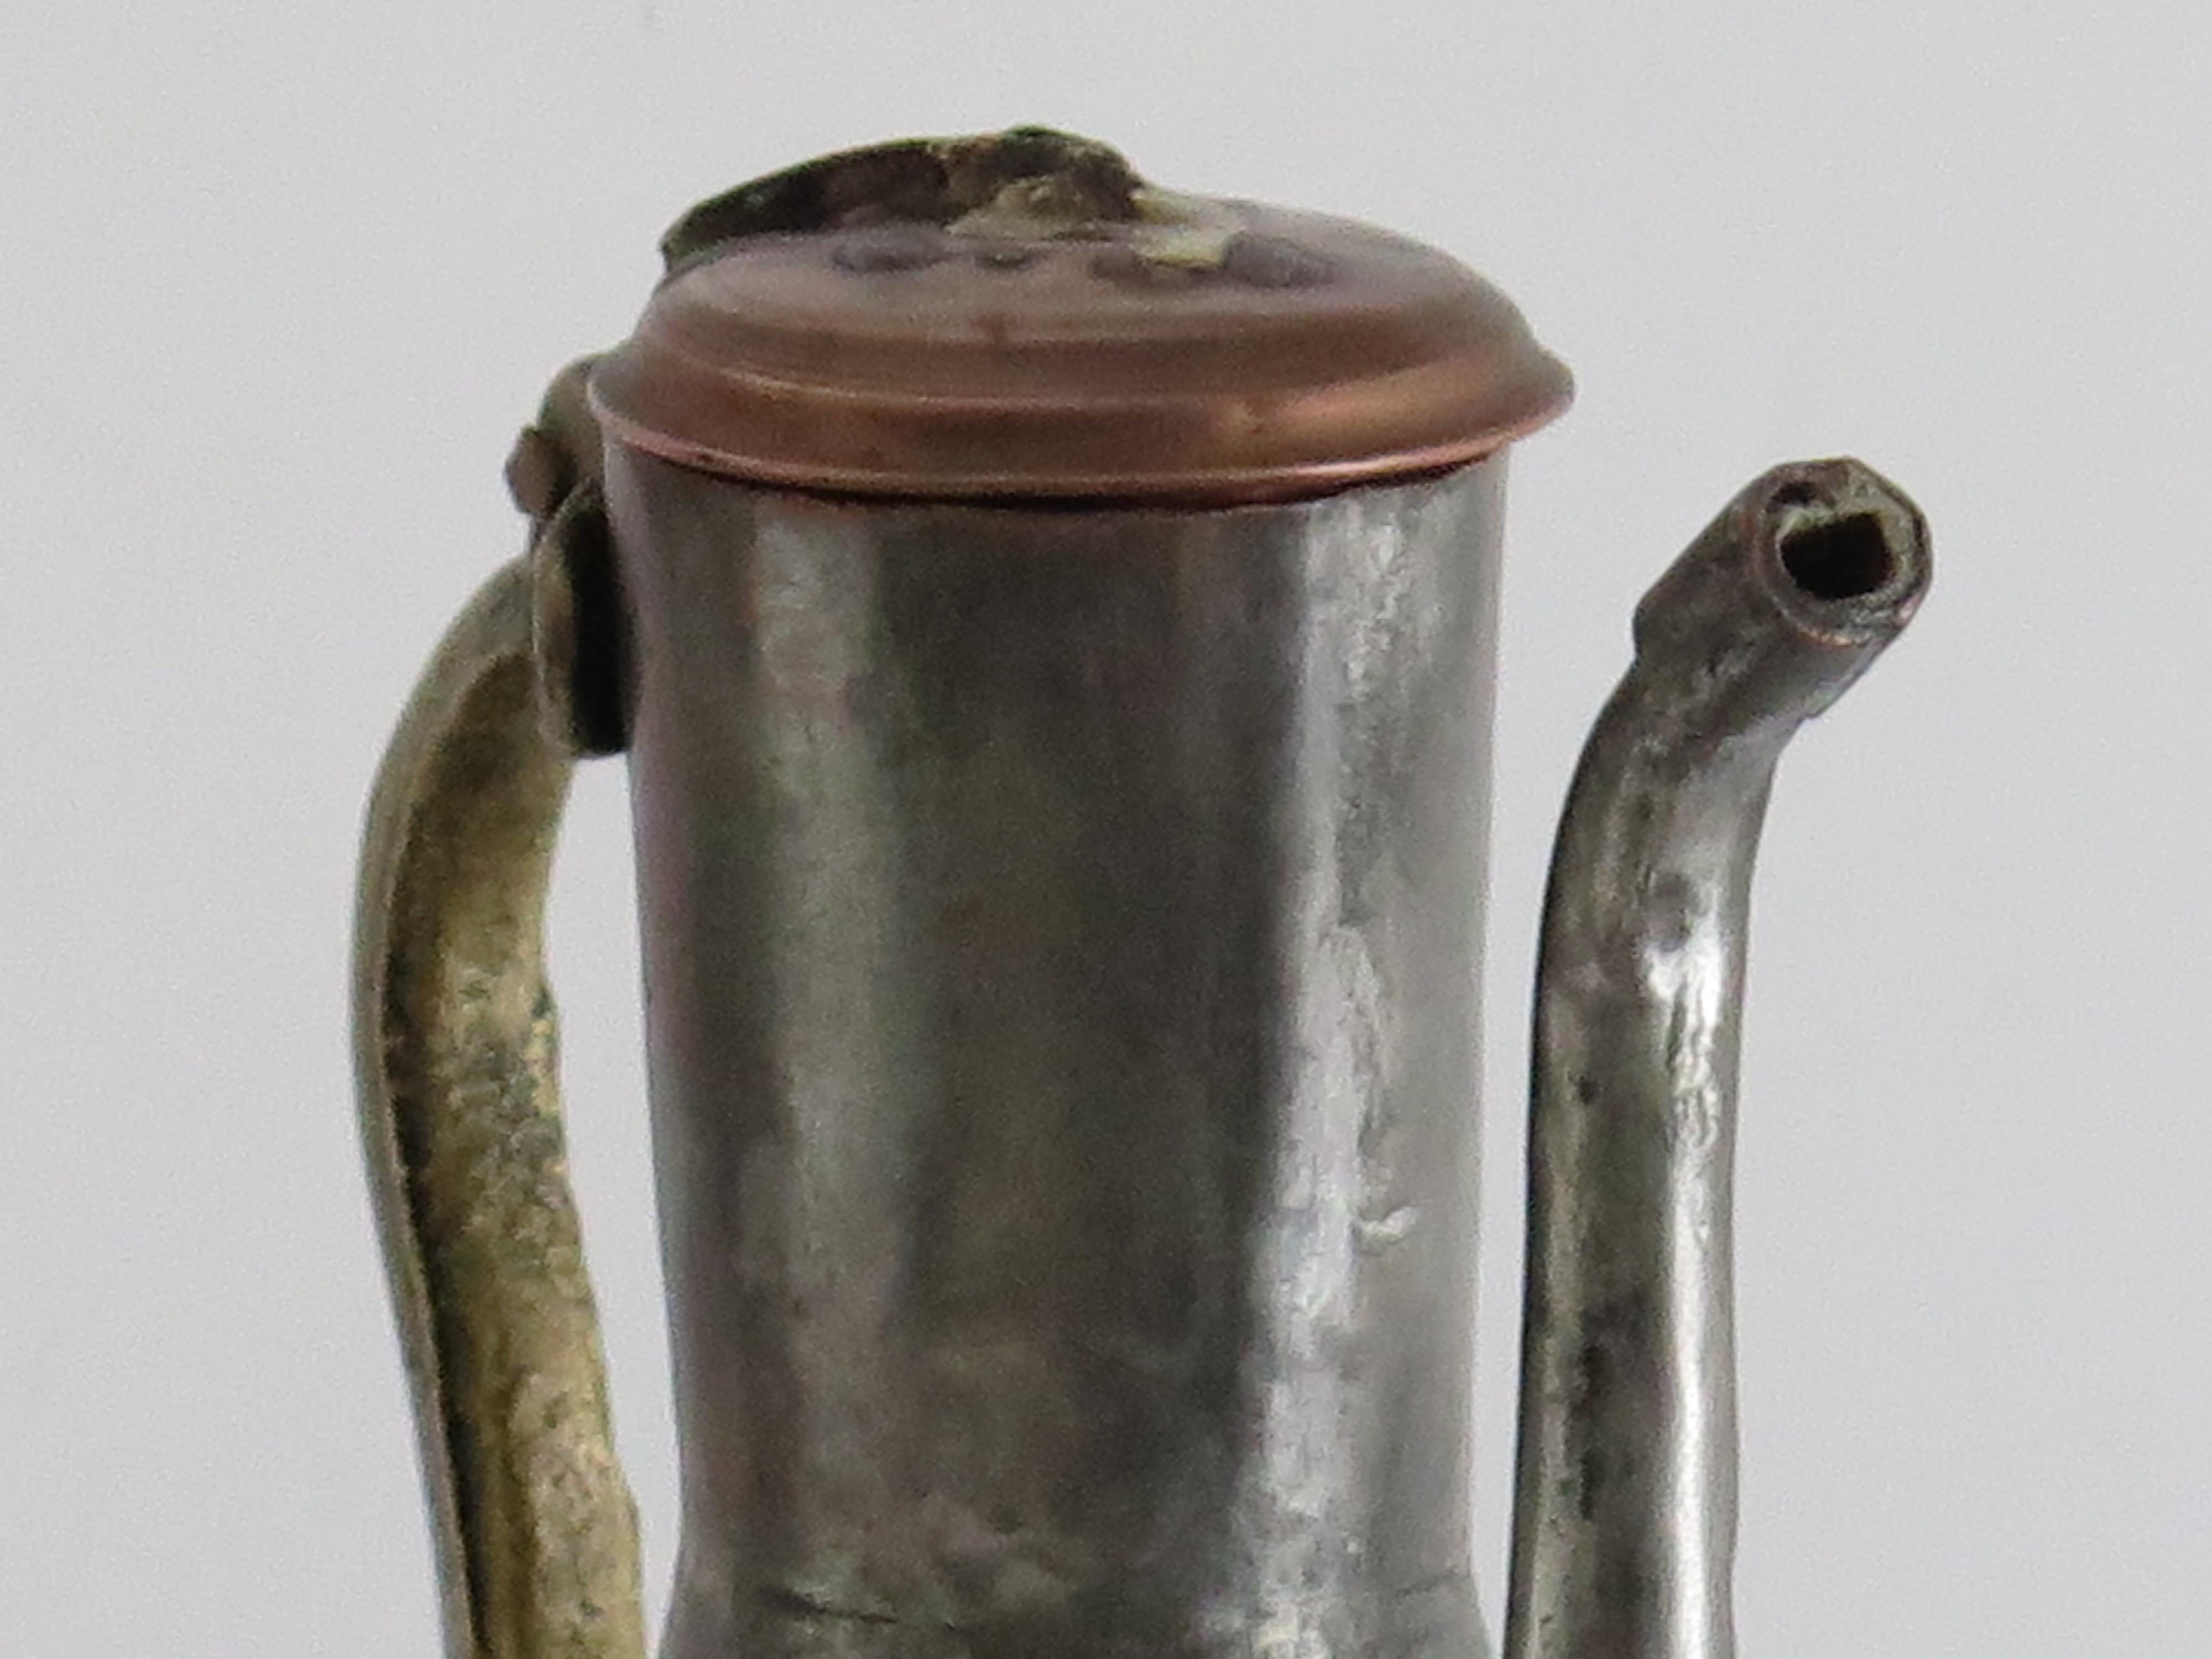 Hand-Crafted Ewer or Pitcher tinned Copper Turkish / Middle Eastern, Early 19th Century For Sale